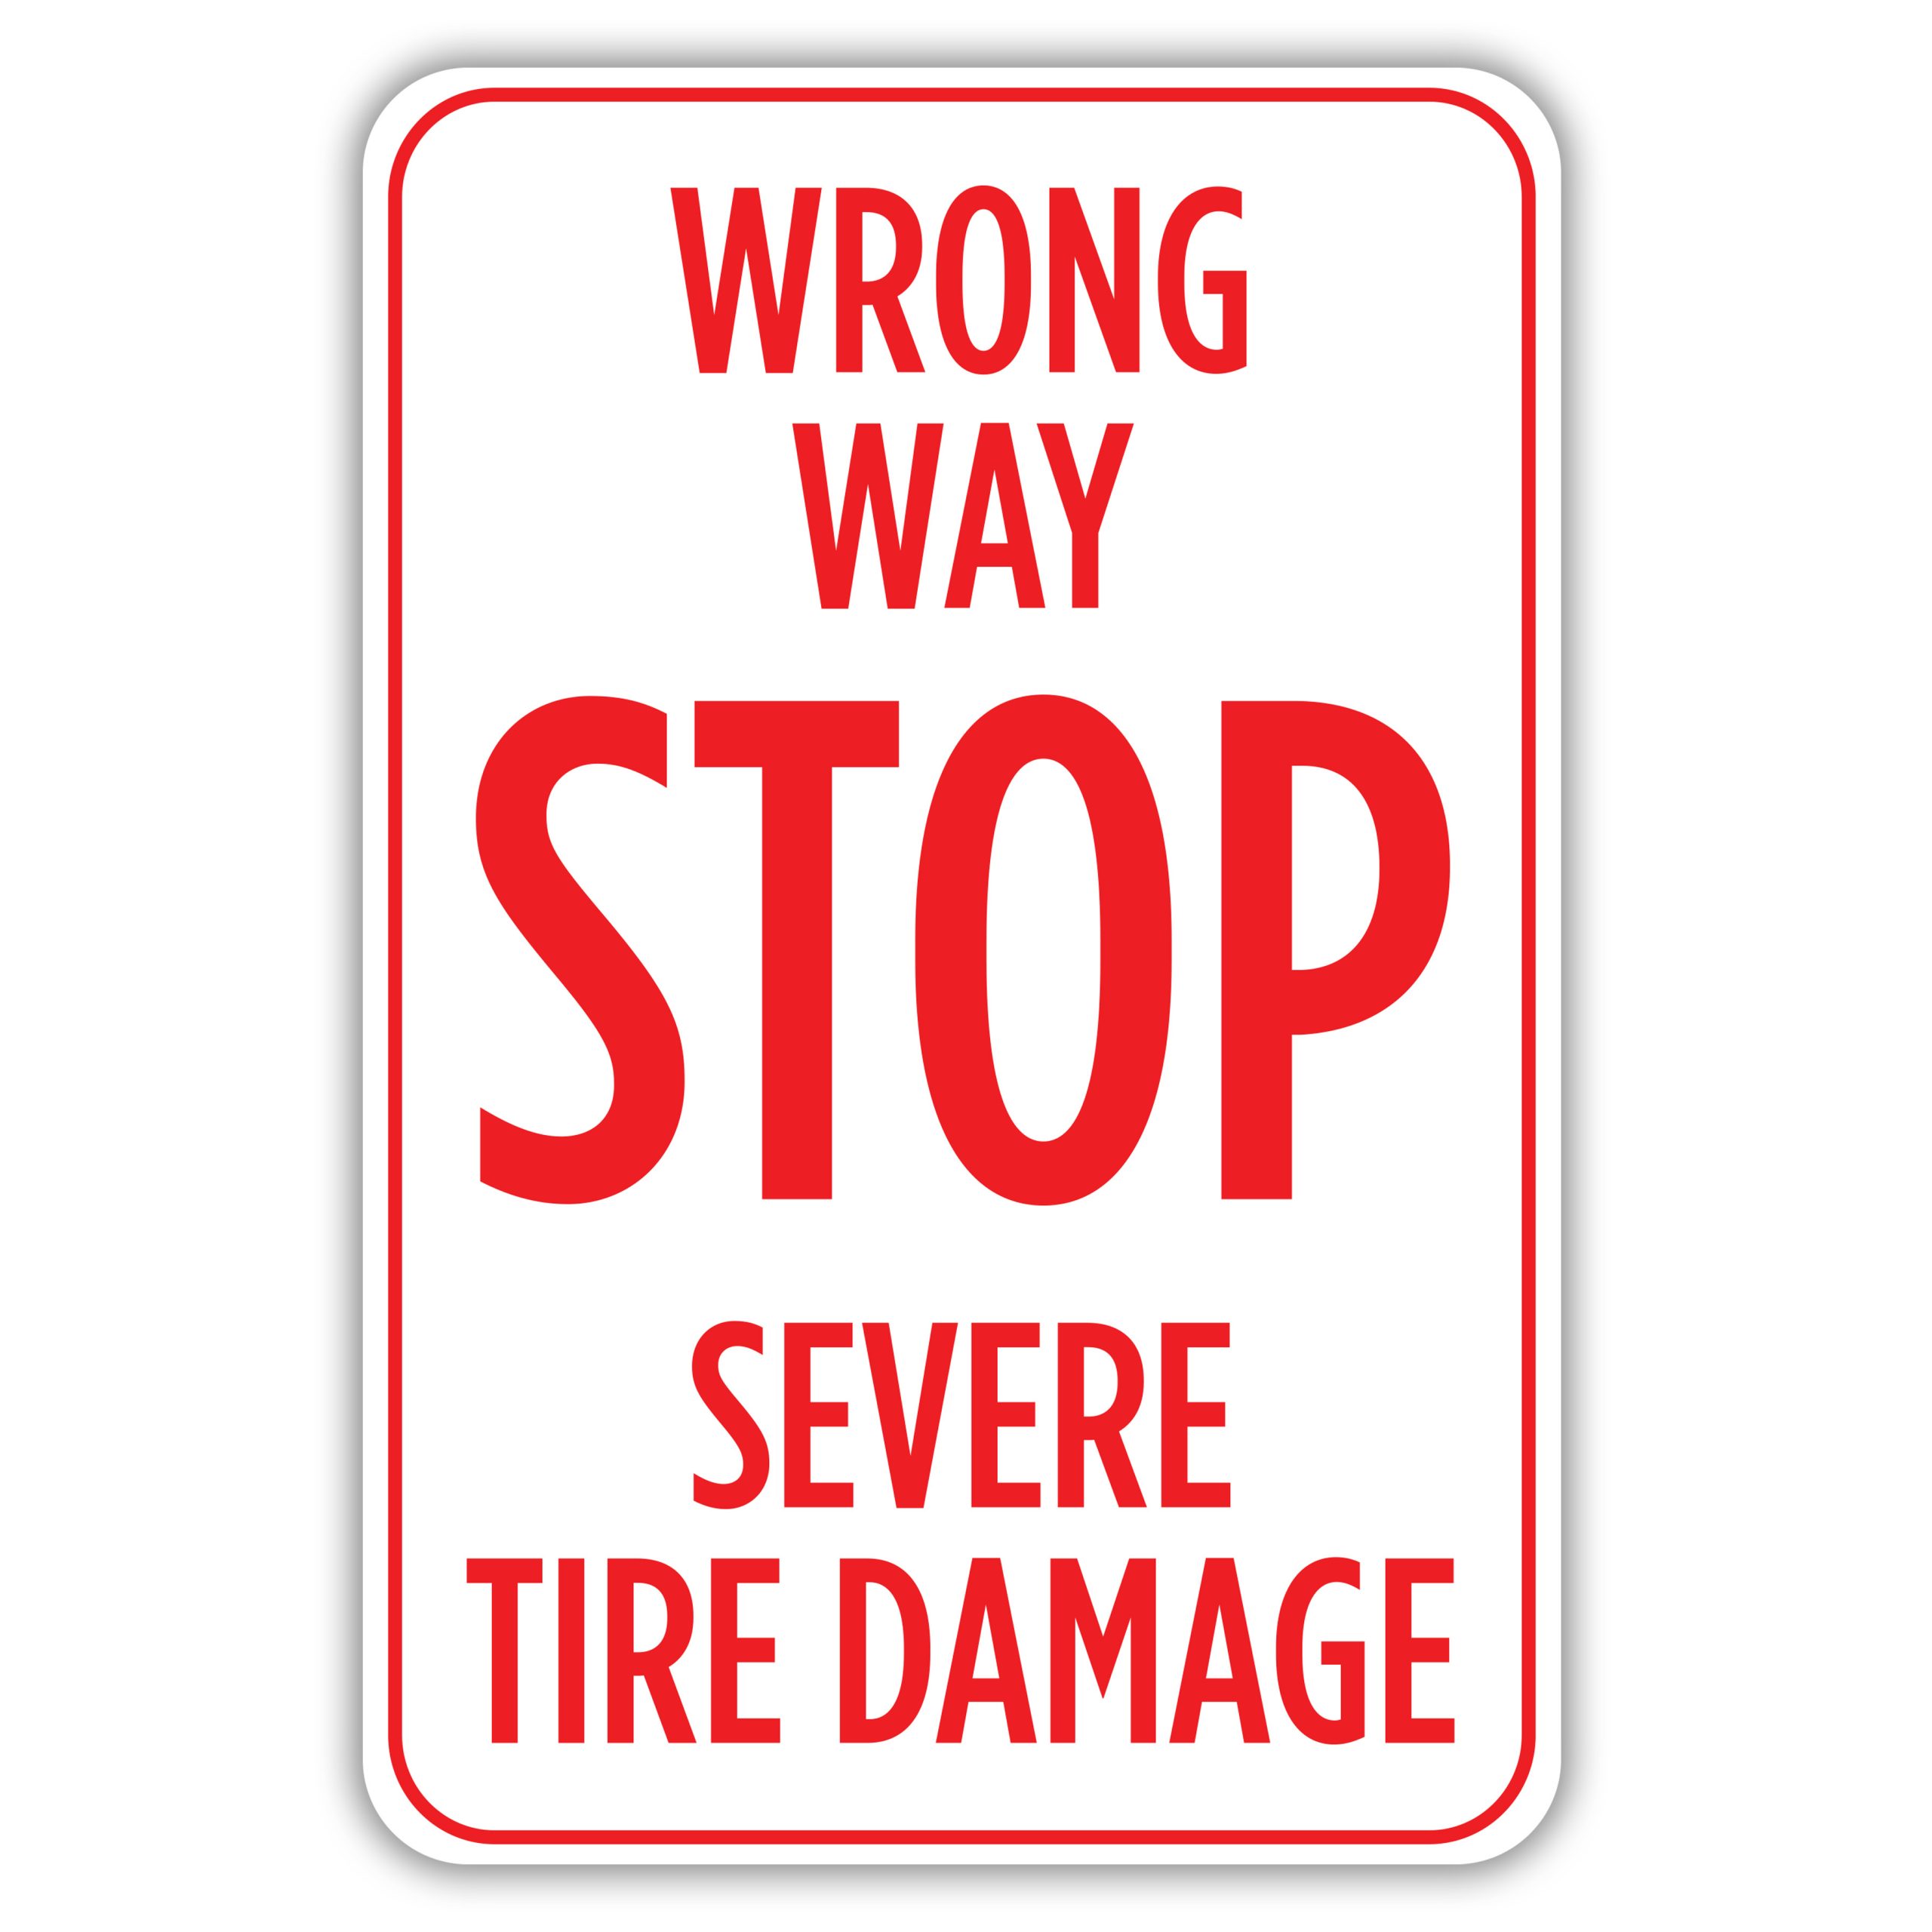 WRONG WAY STOP SEVERE TIRE DAMAGE HEAVY DUTY ALUMINUM SIGN 10" x 15" 